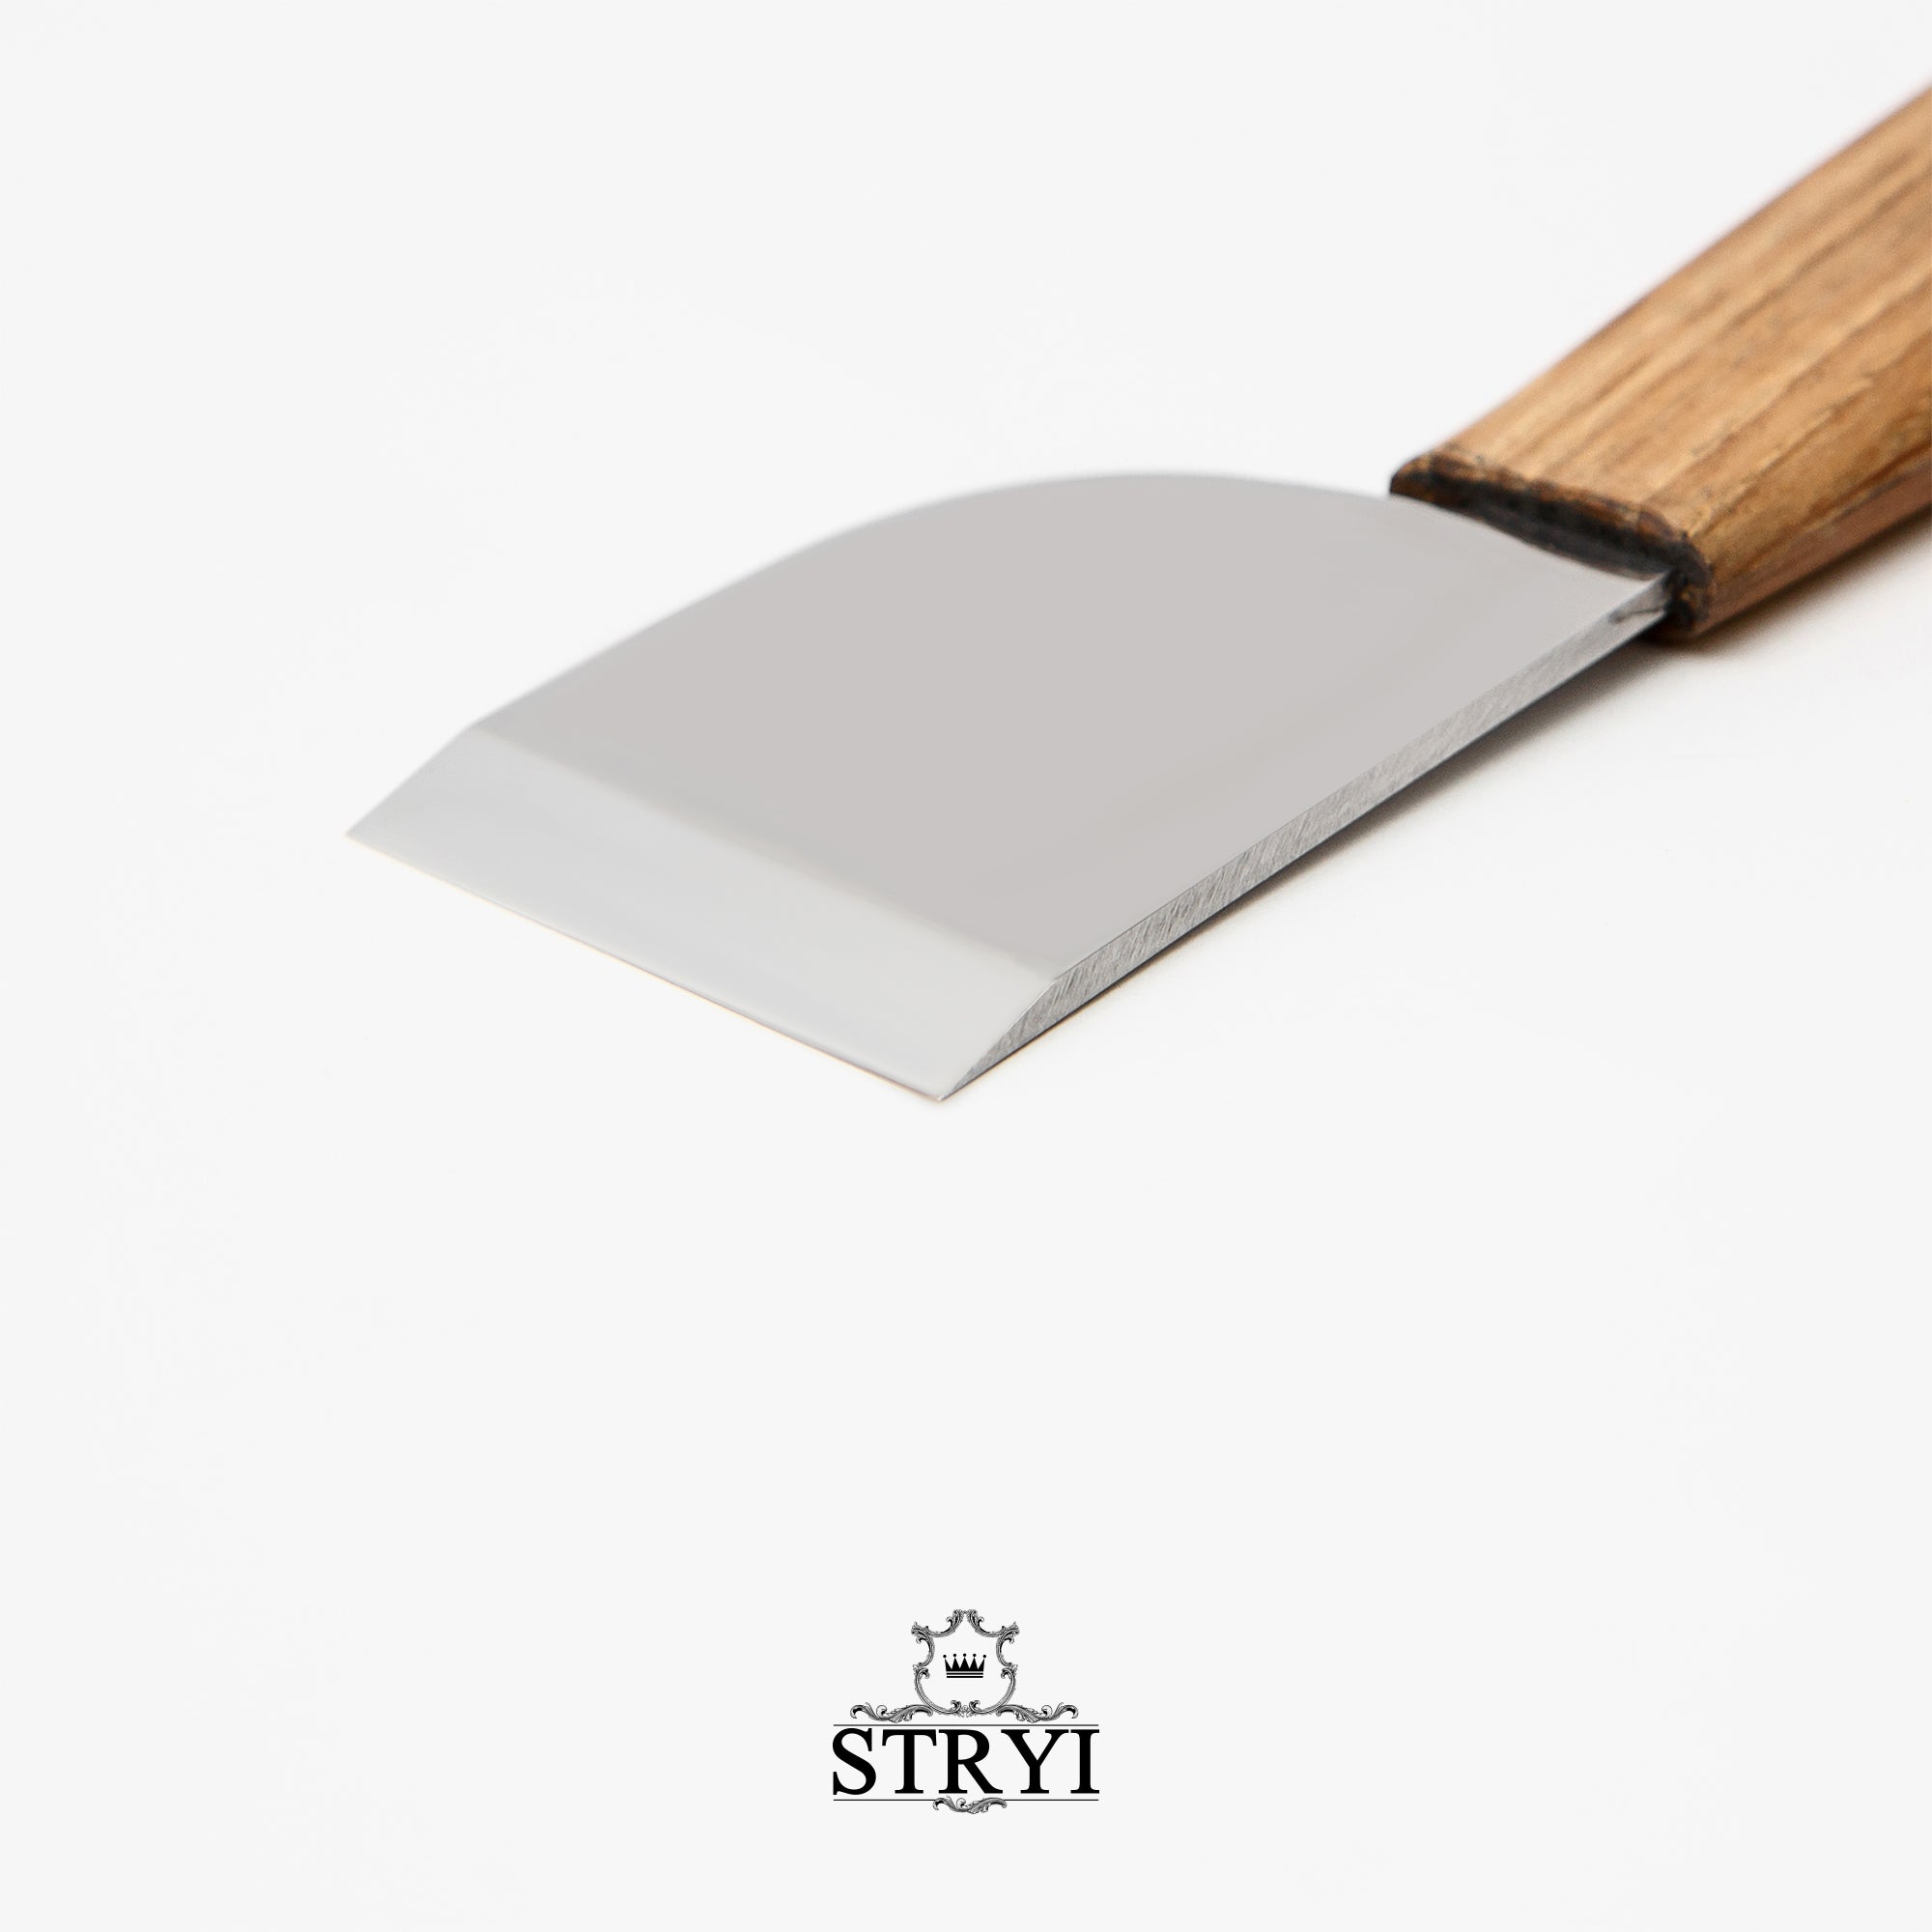 Angled Leather Skiving Knife > STRONGWAY TOOLS, L.L.C.